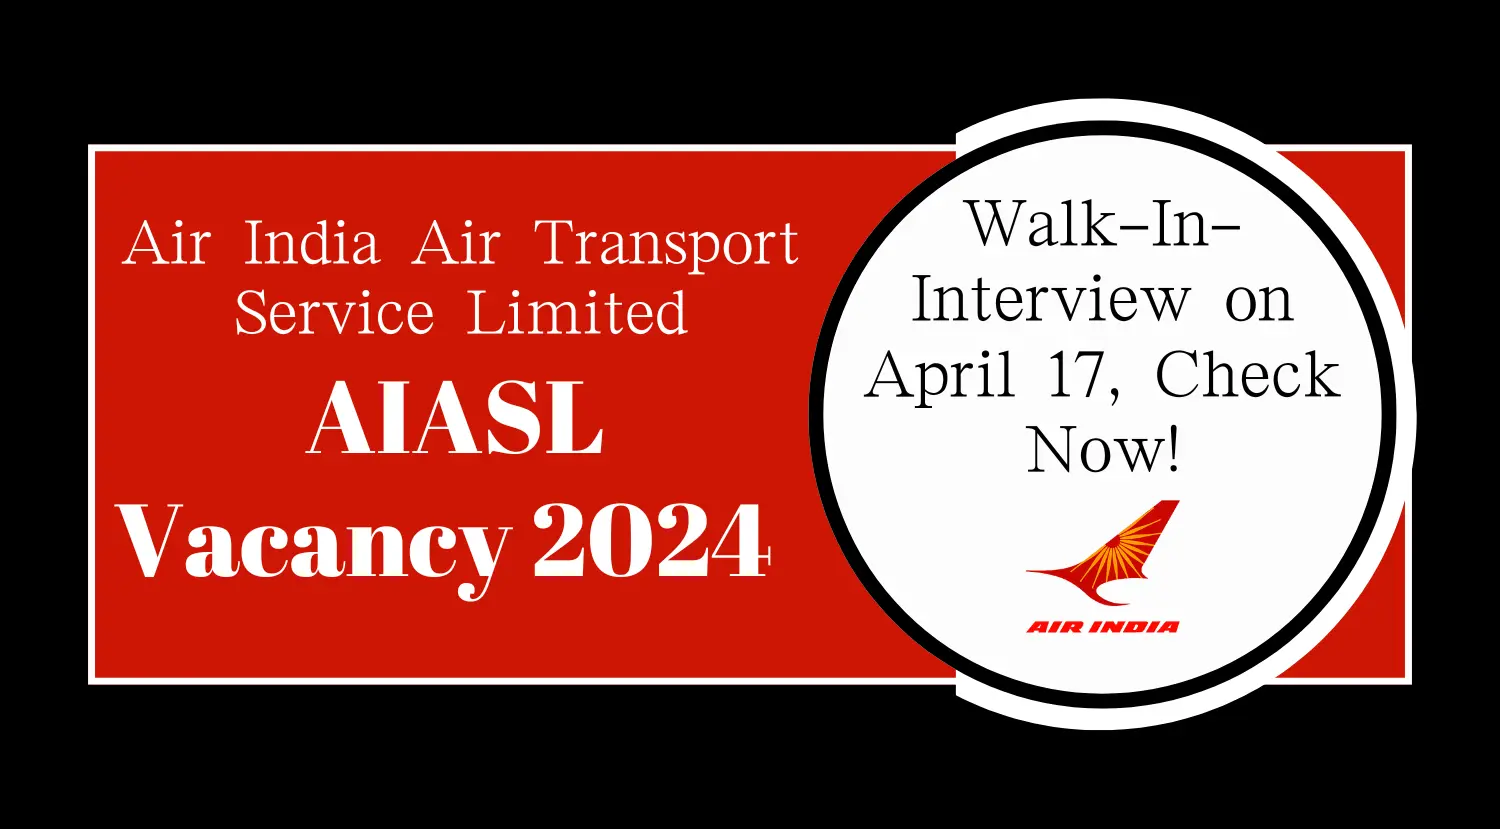 AIASL Vacancy 2024 Walk-In-Interview on April 17 Check Now